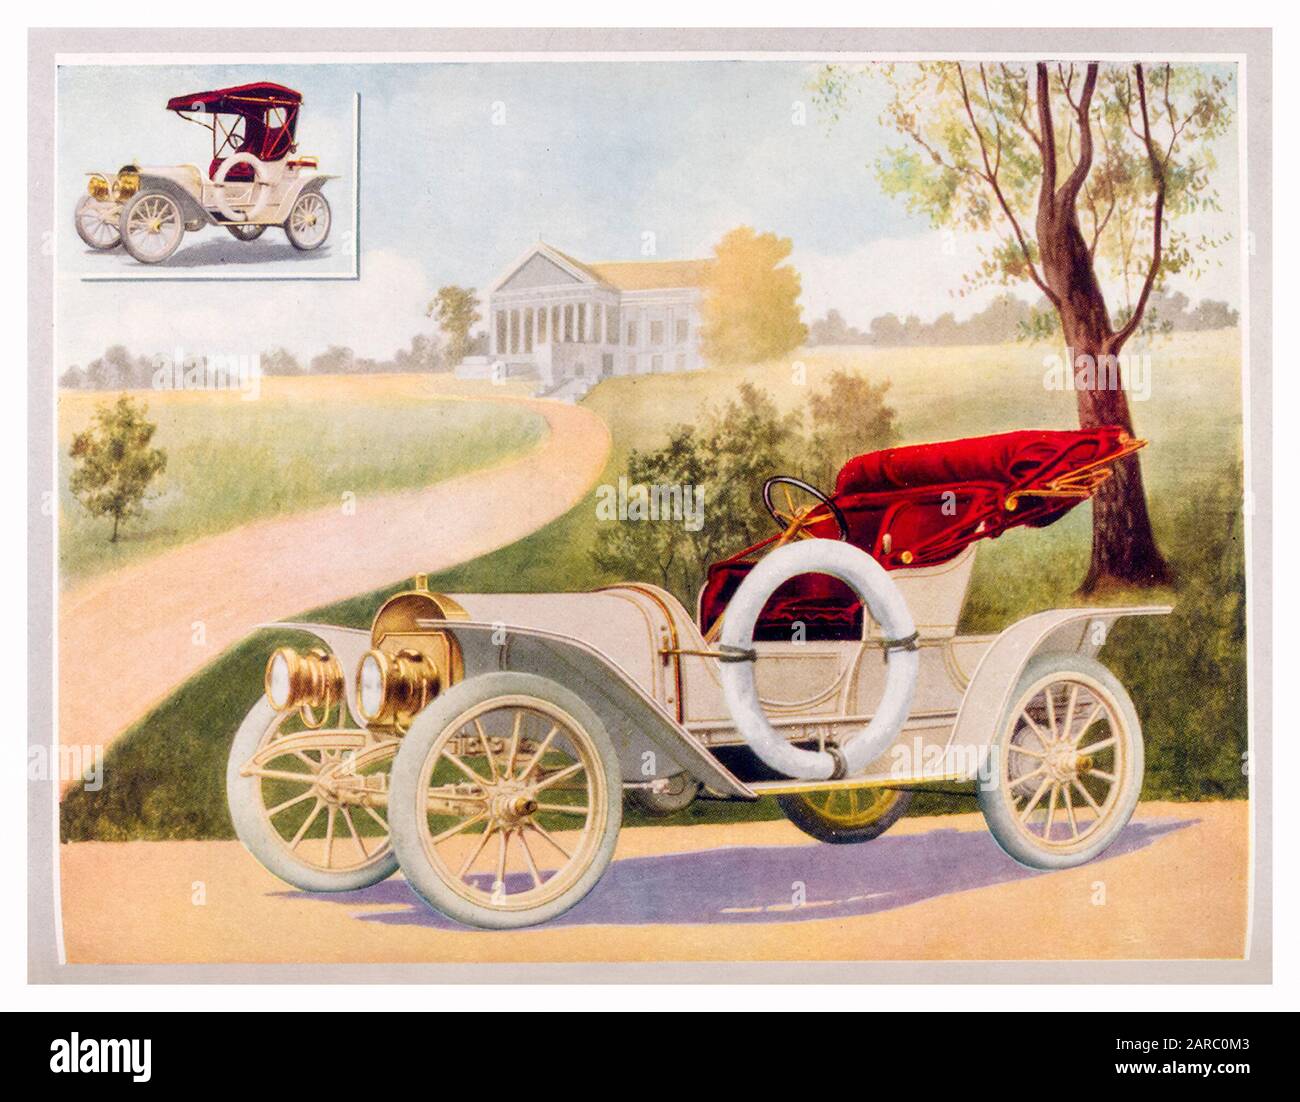 Vintage Car, early Electric Car, Babcock Electrics Model 12 Gentleman's Roadster, Price $2000, illustration 1909 Stock Photo